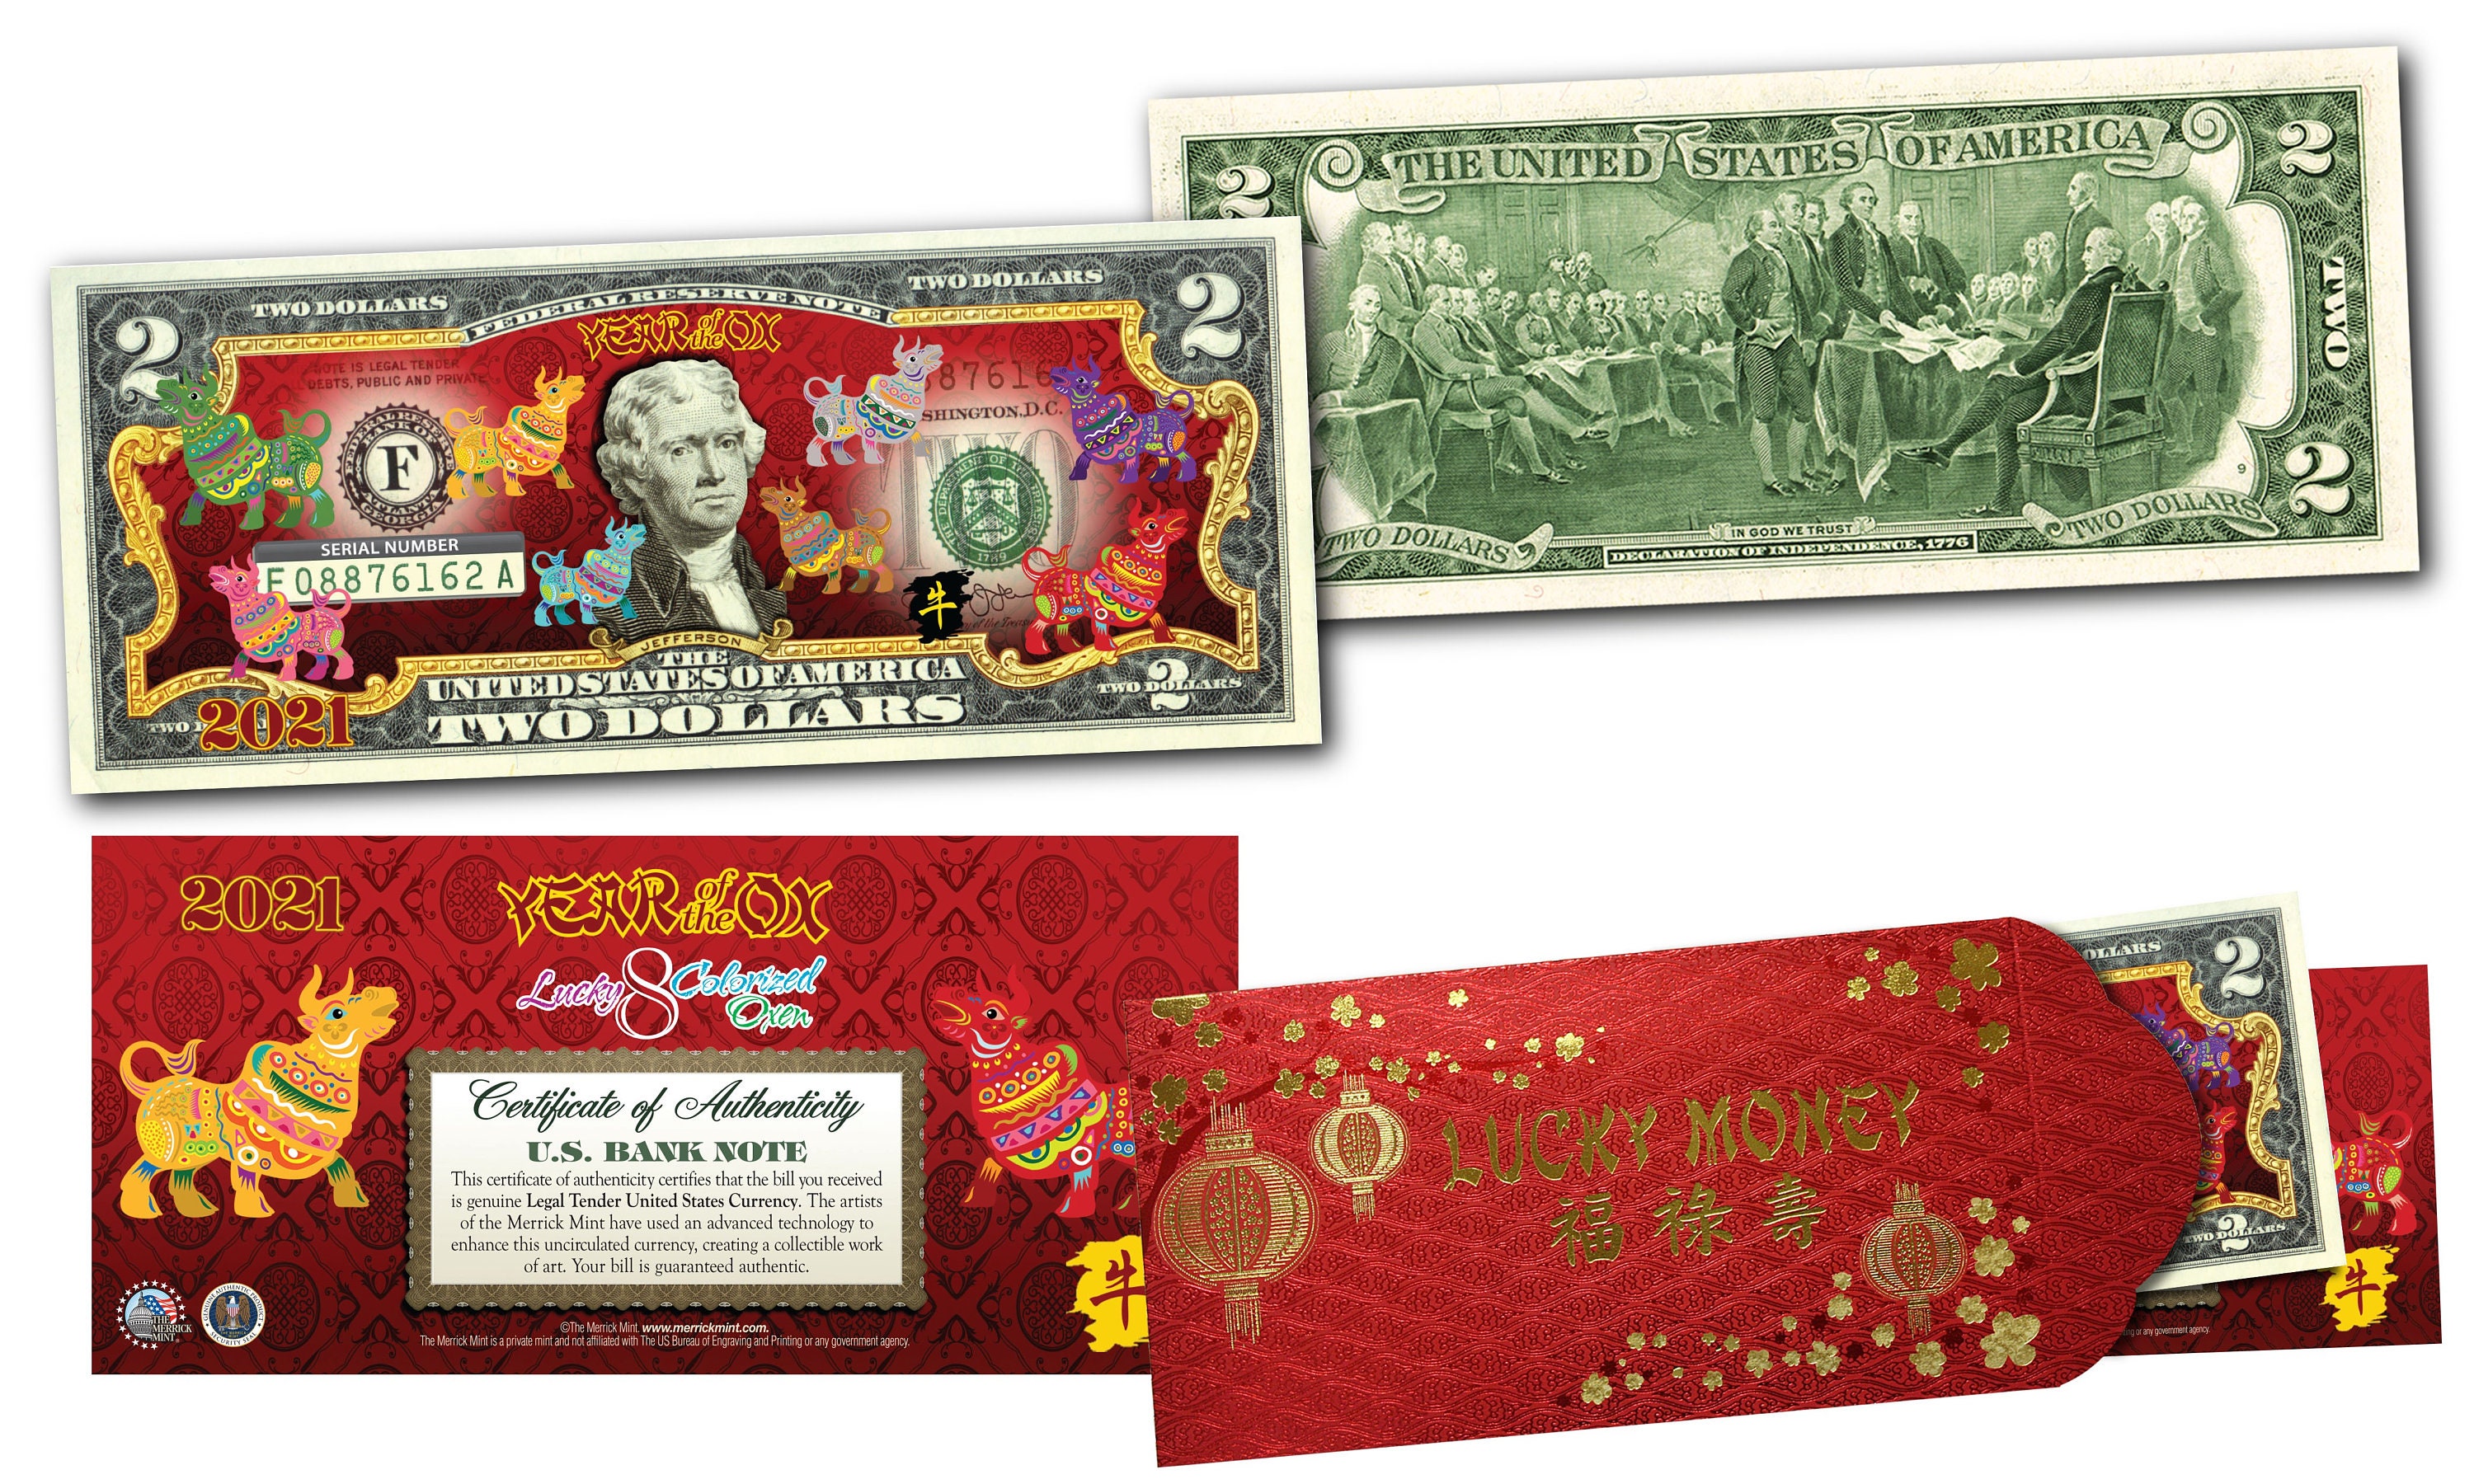 Red Packet and Money Banknote Thai Baht Red Envelope for New Year